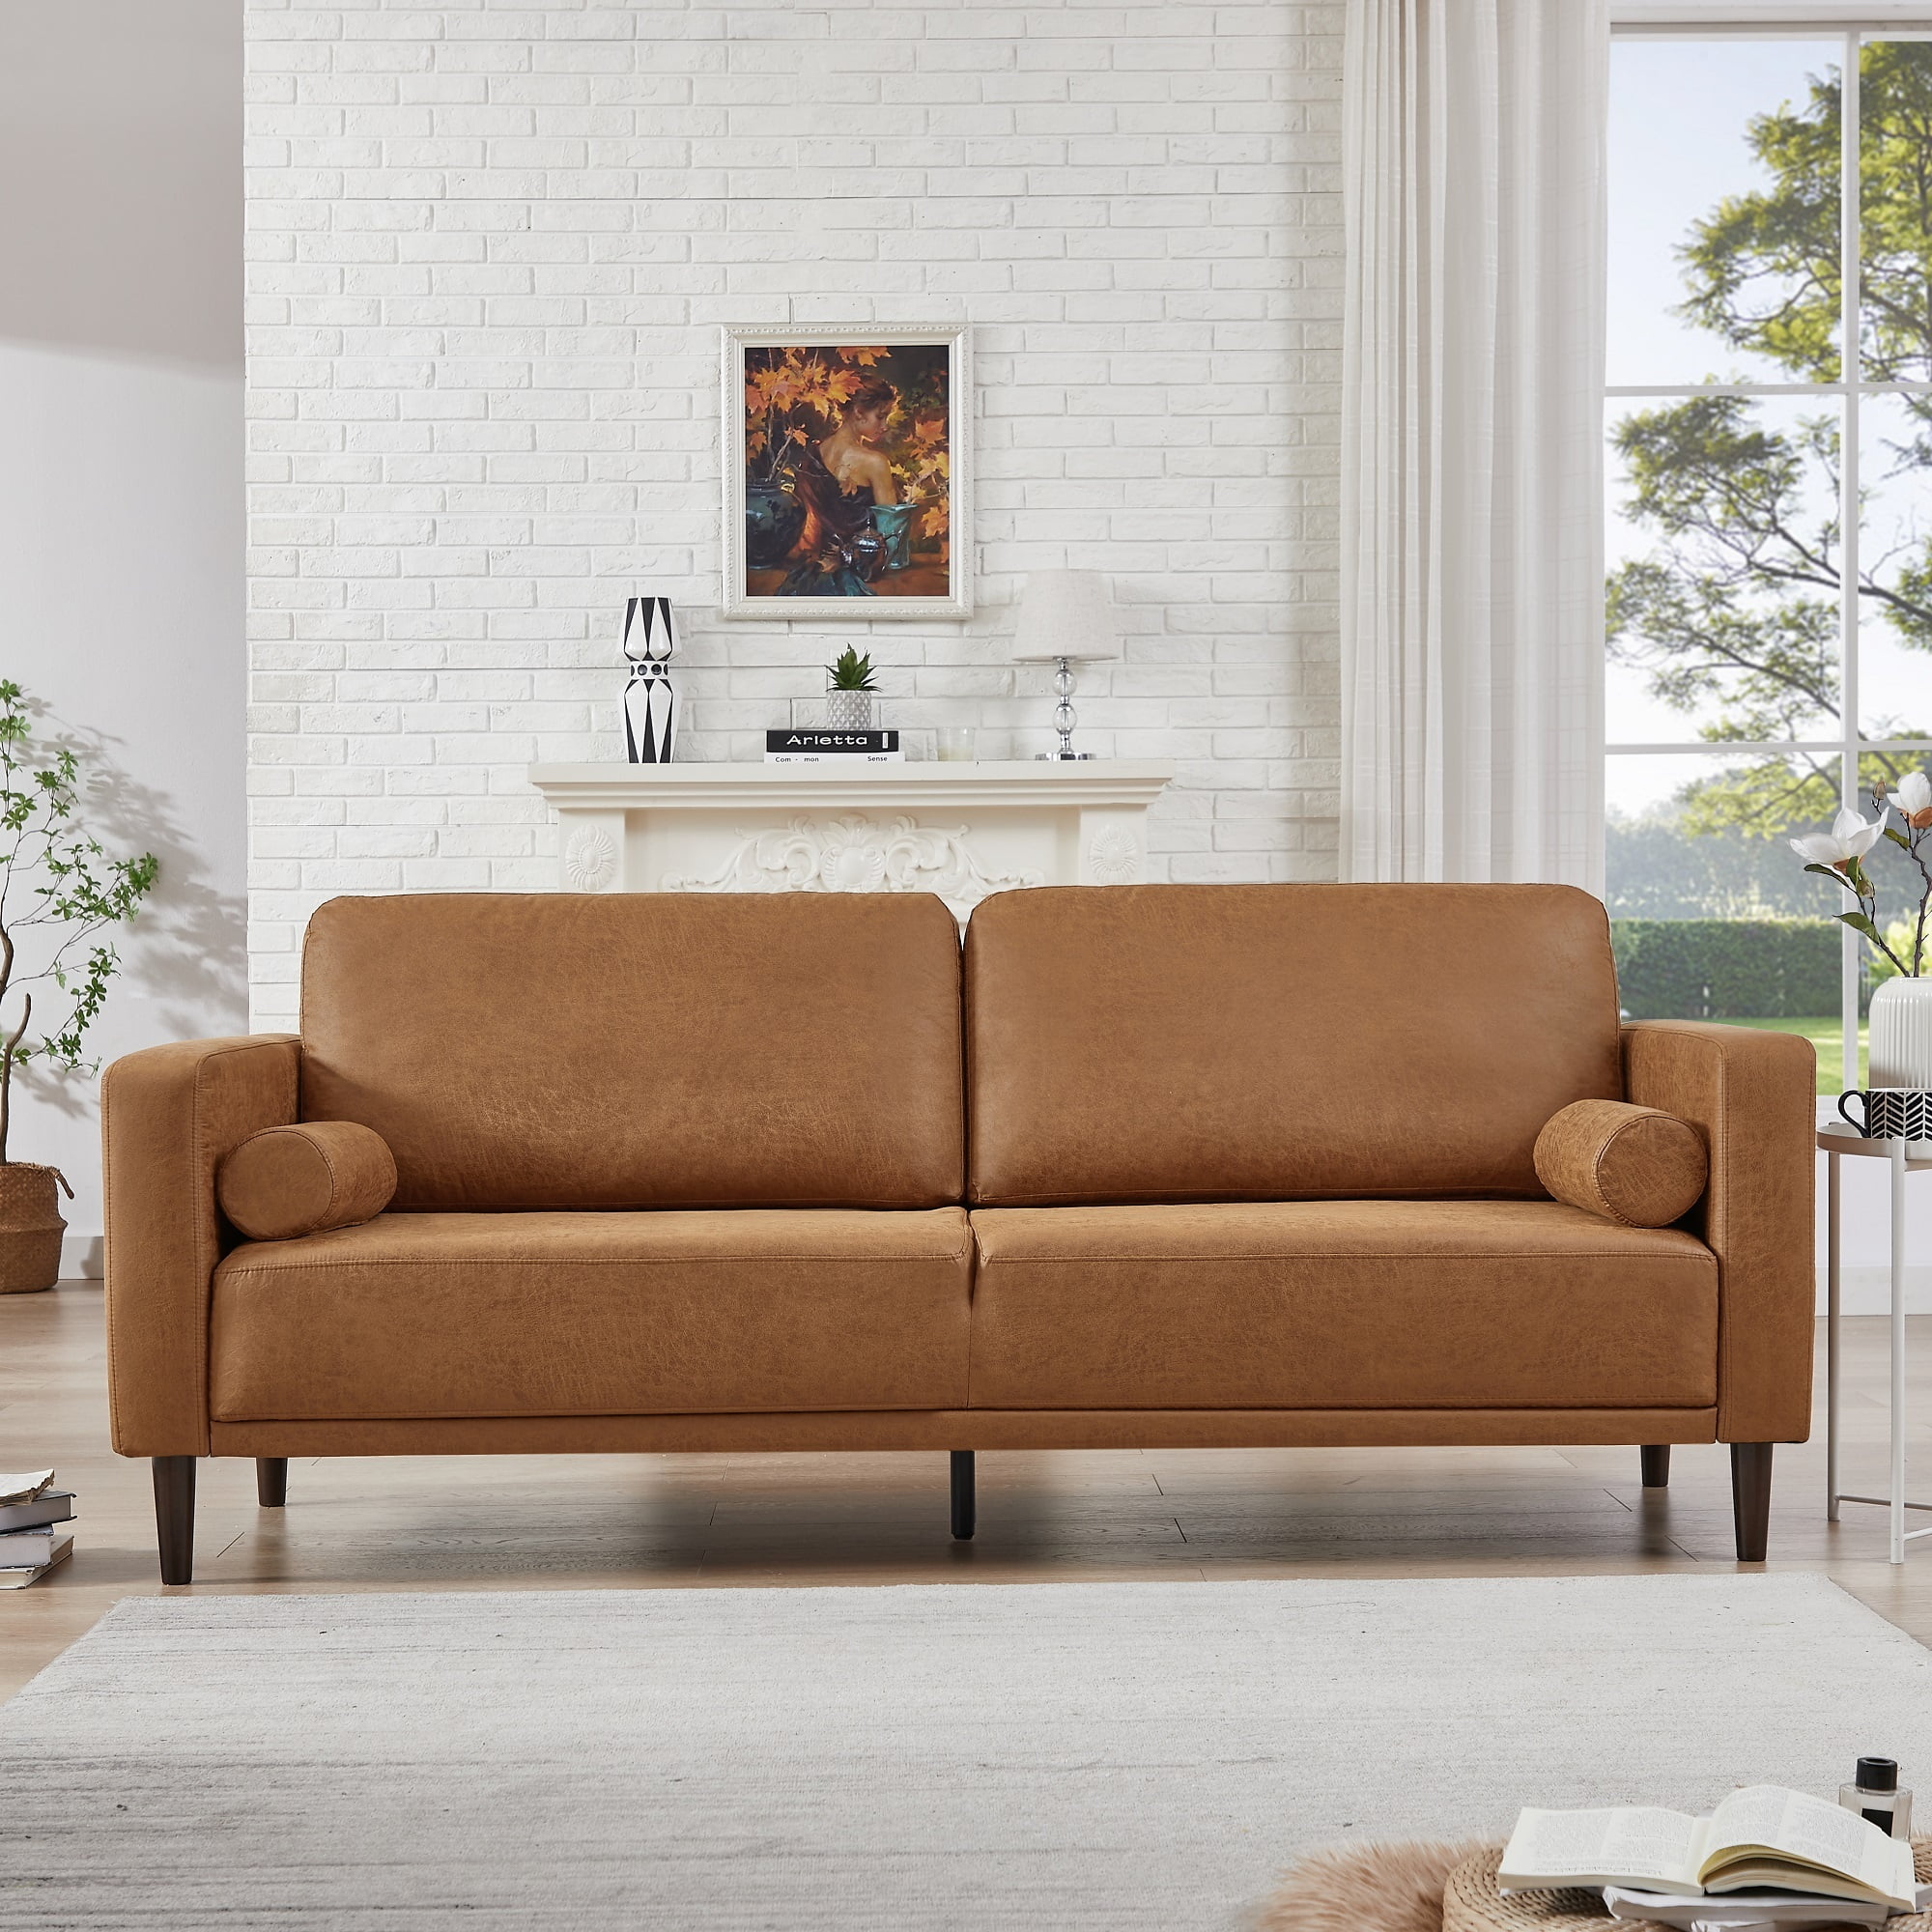 Homfa Sofa, Couch Camel Square 78.9\'\' Seat 3 Arm, Large Upholstered Modern PU with